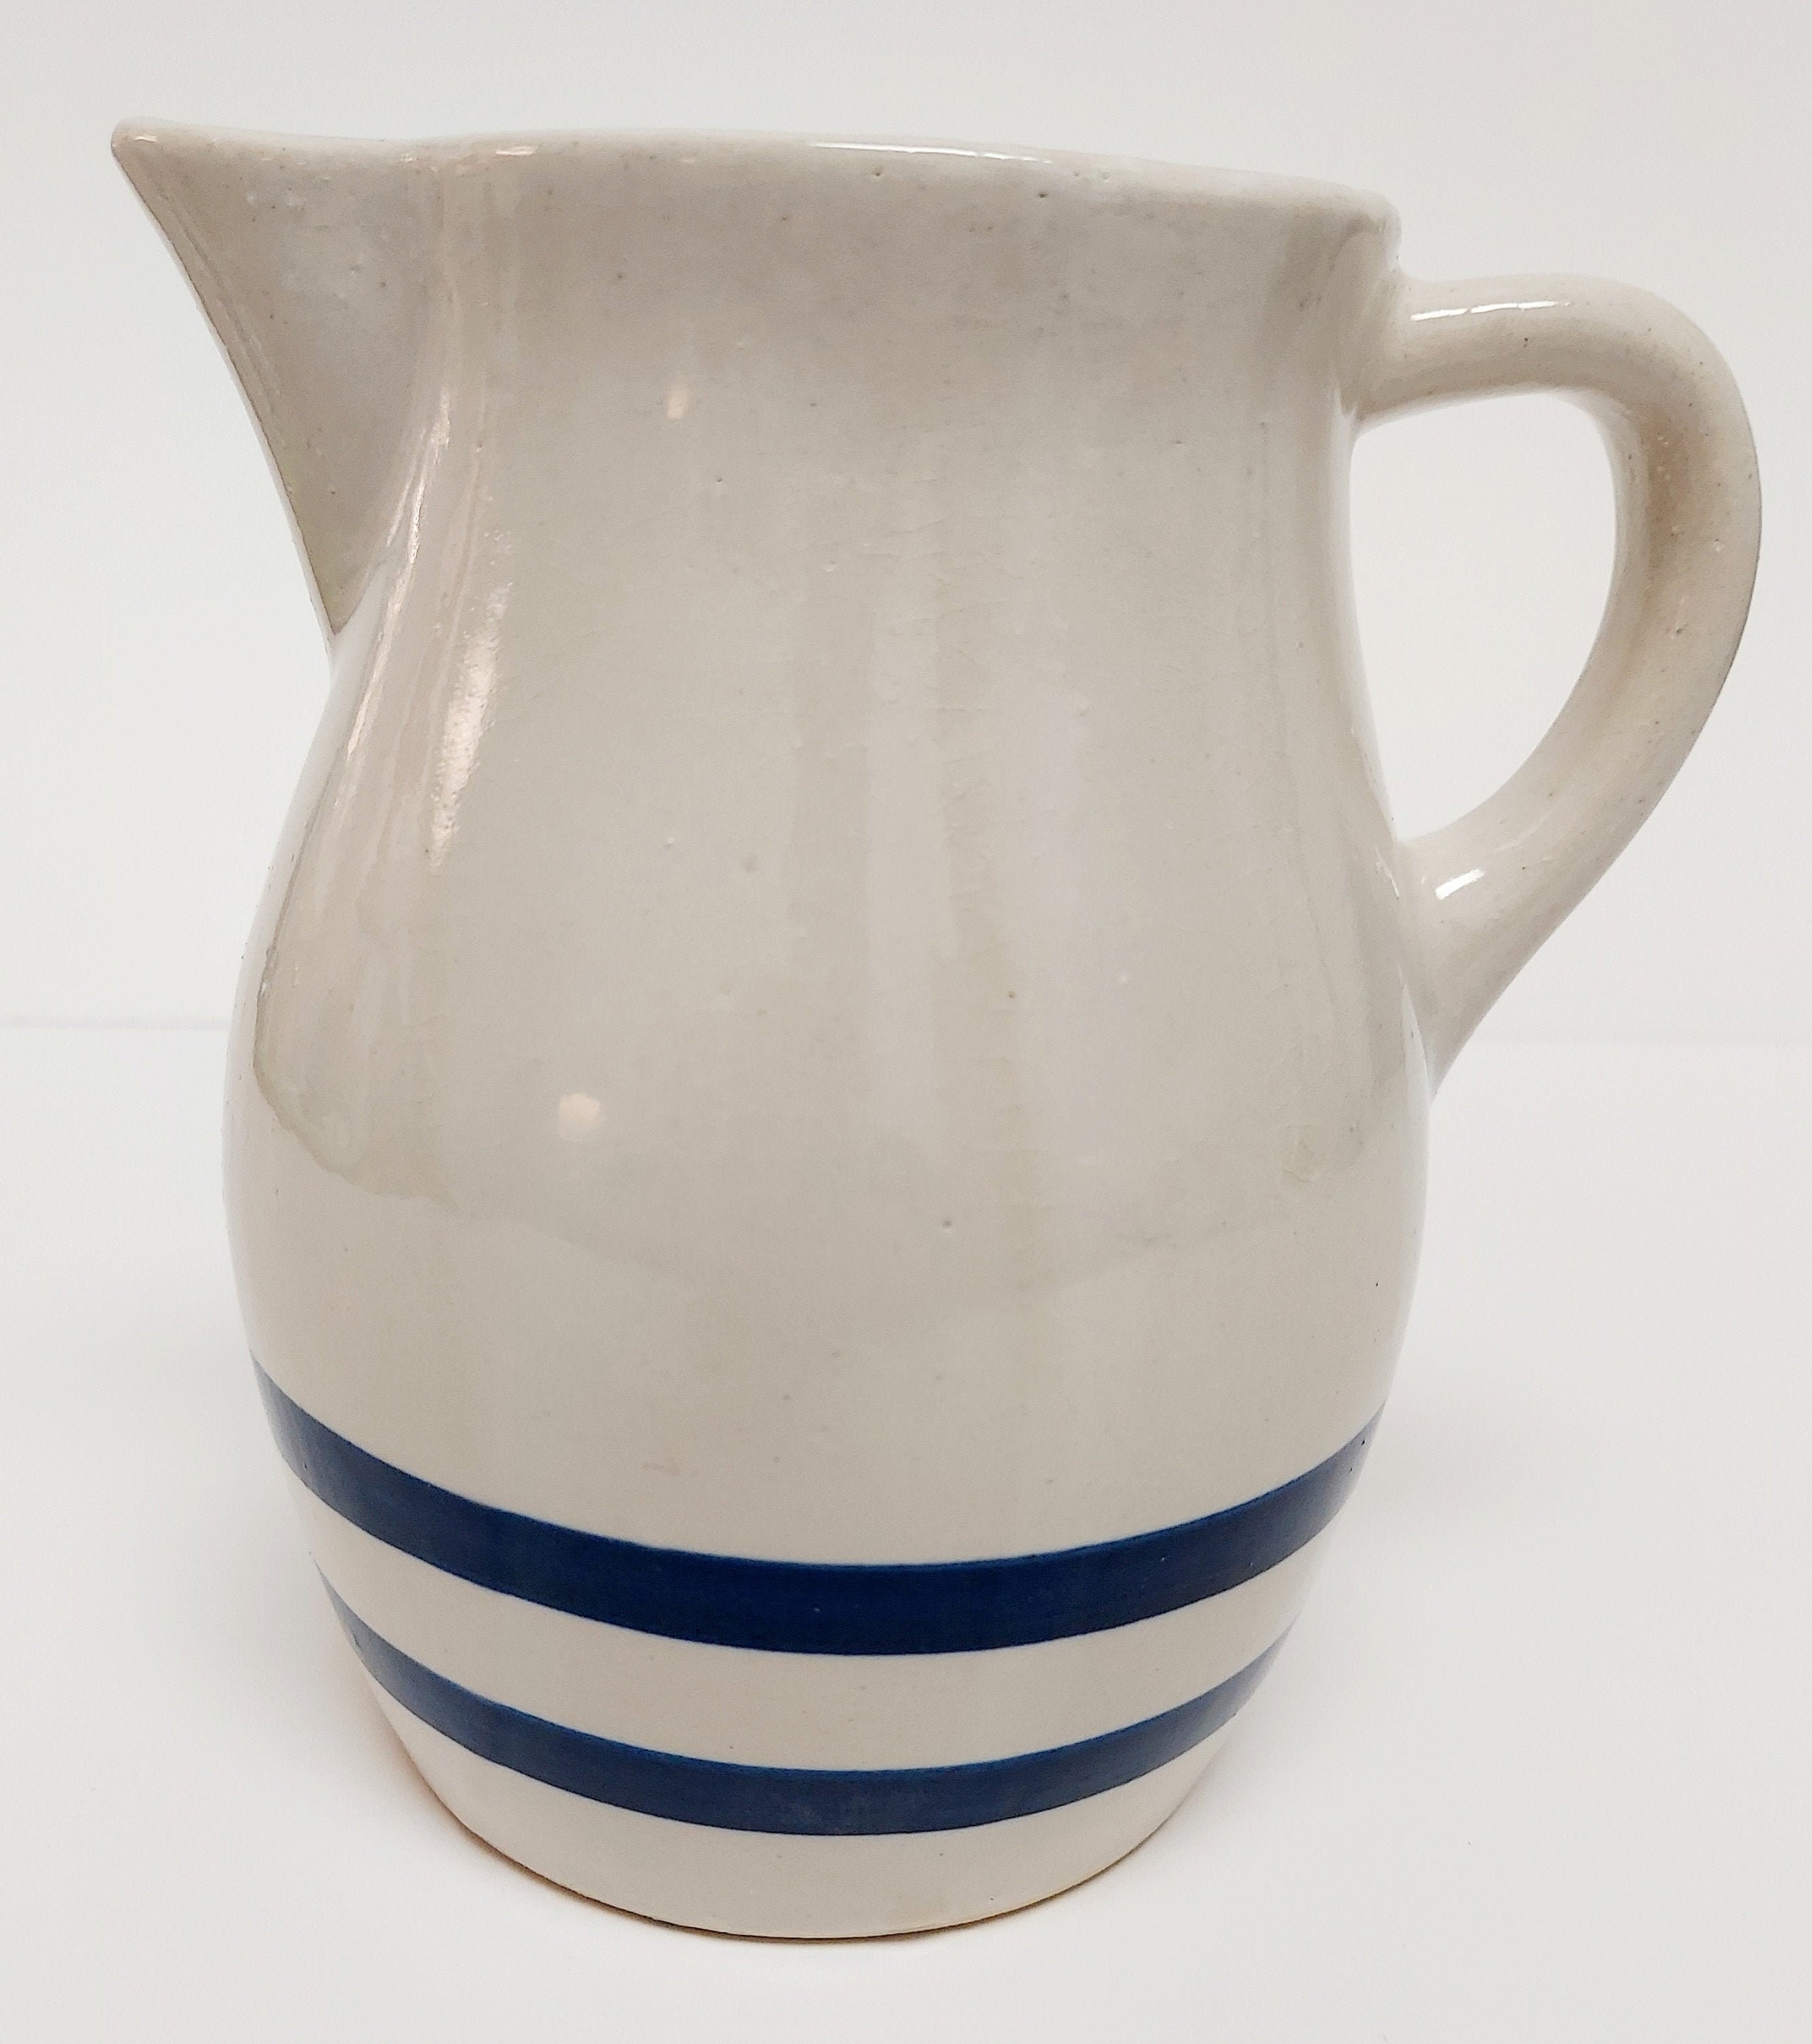 Two small milk pitchers with blue & white stripes - Martres